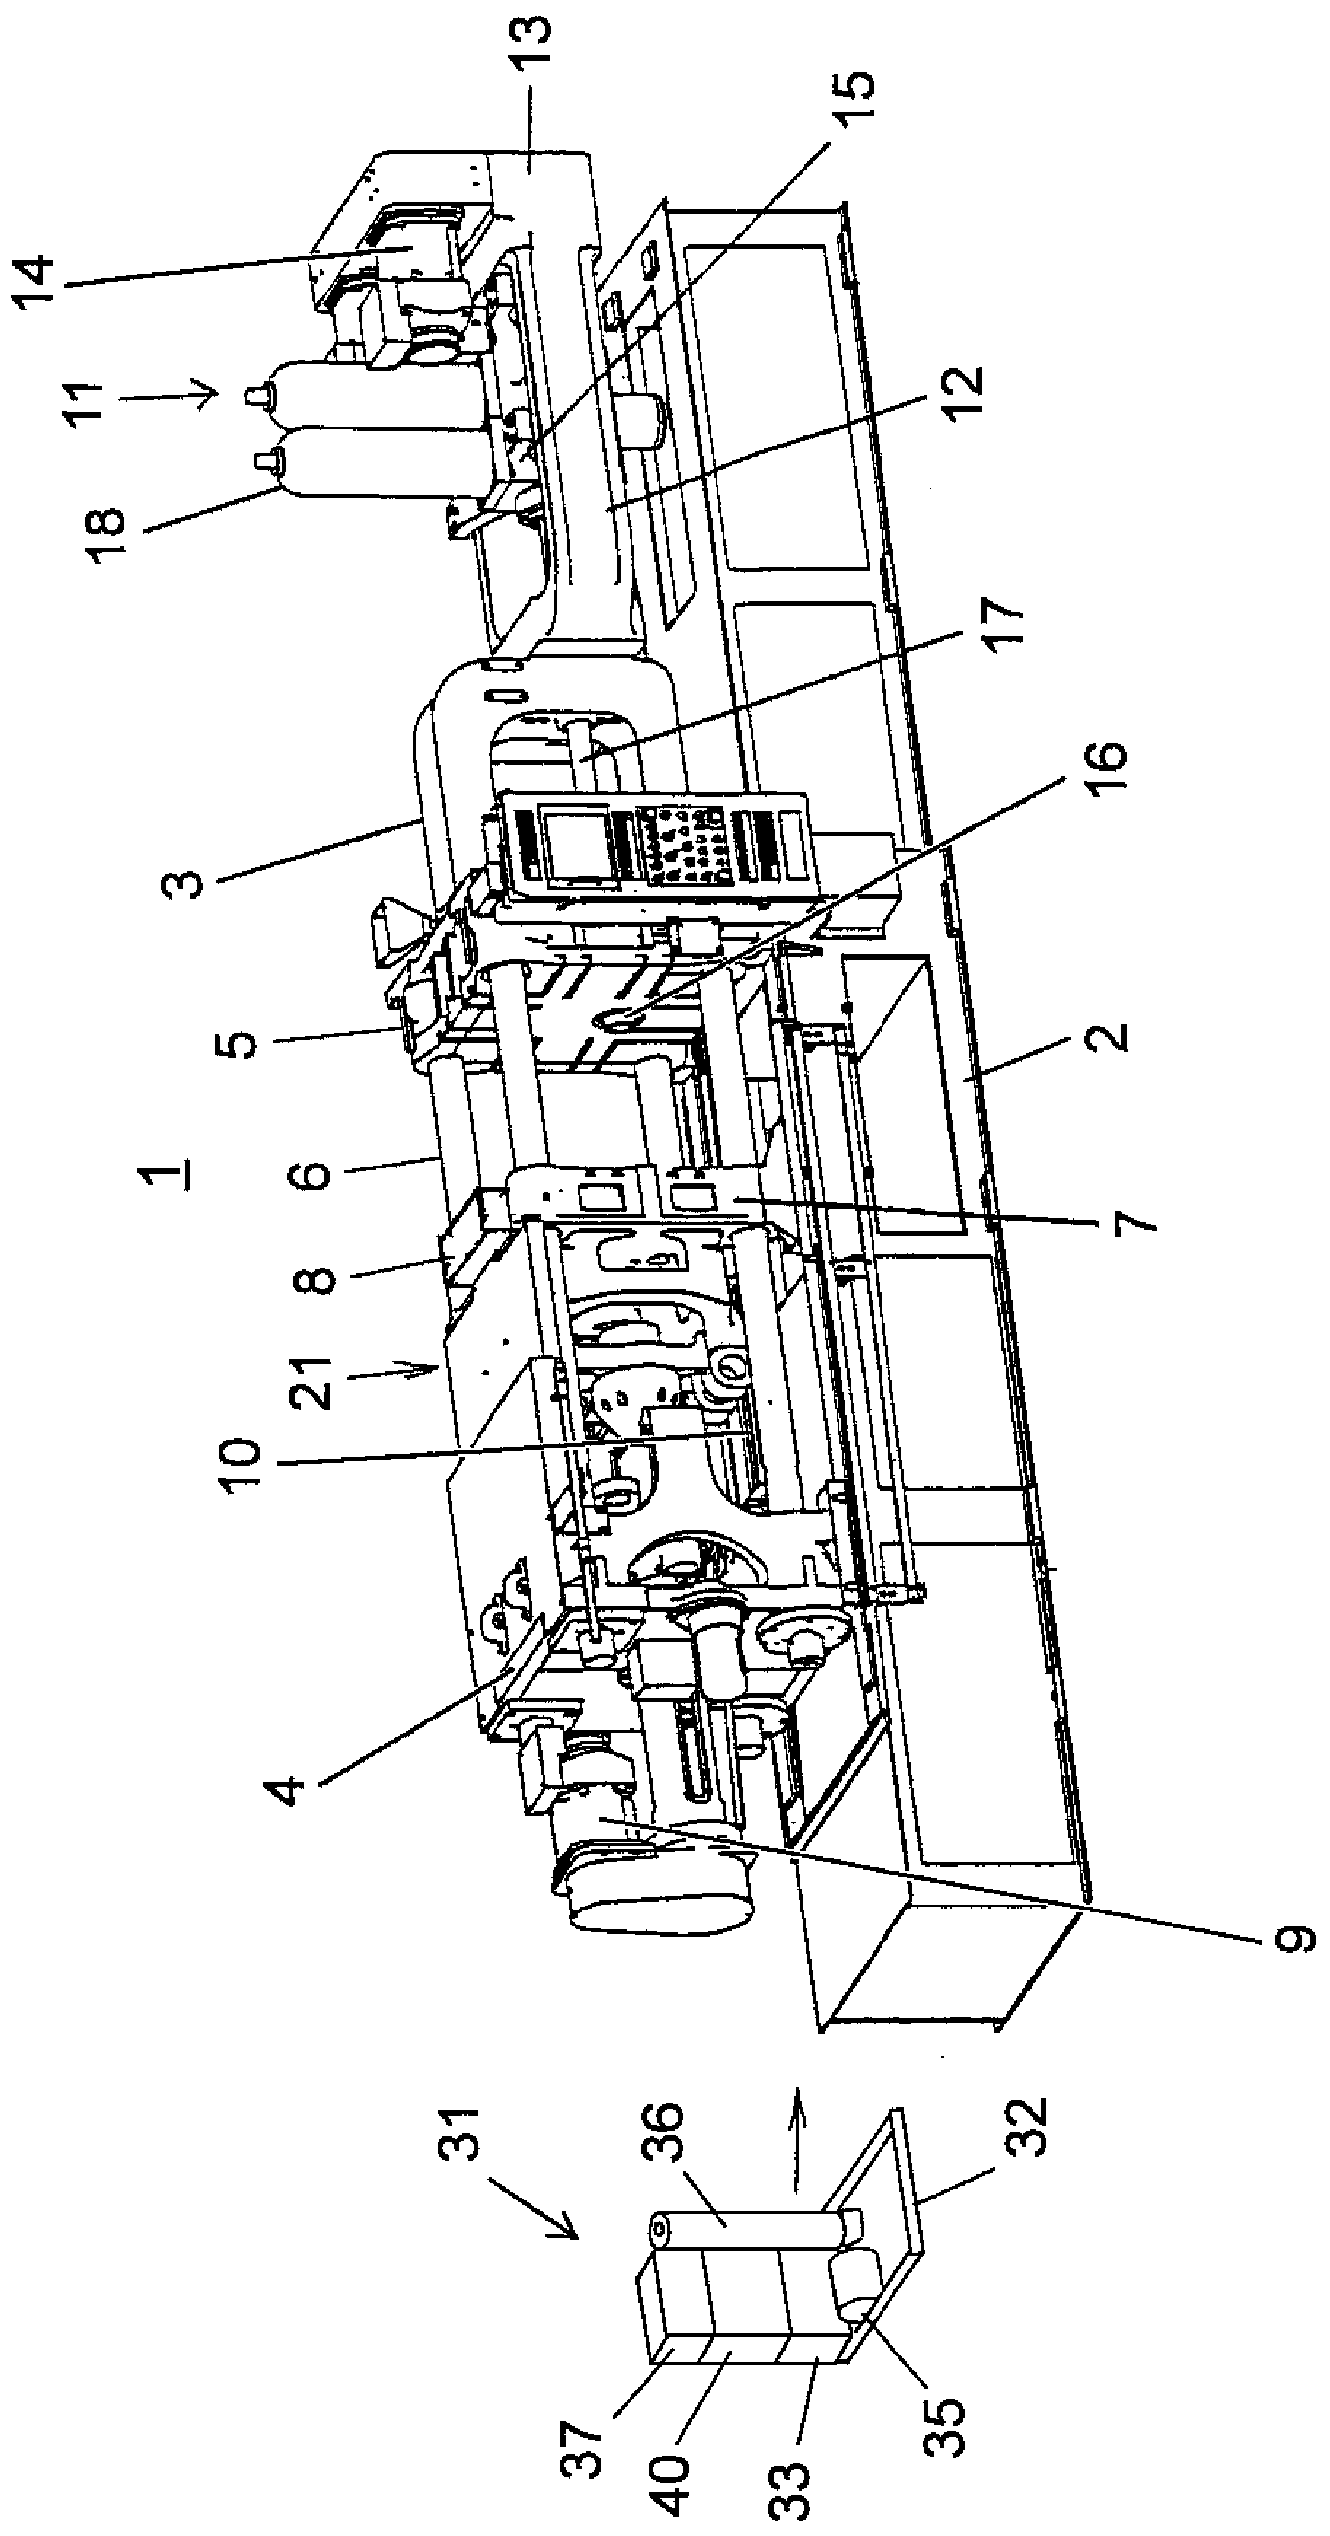 Electric die-casting machine with core-riving hydraulic unit